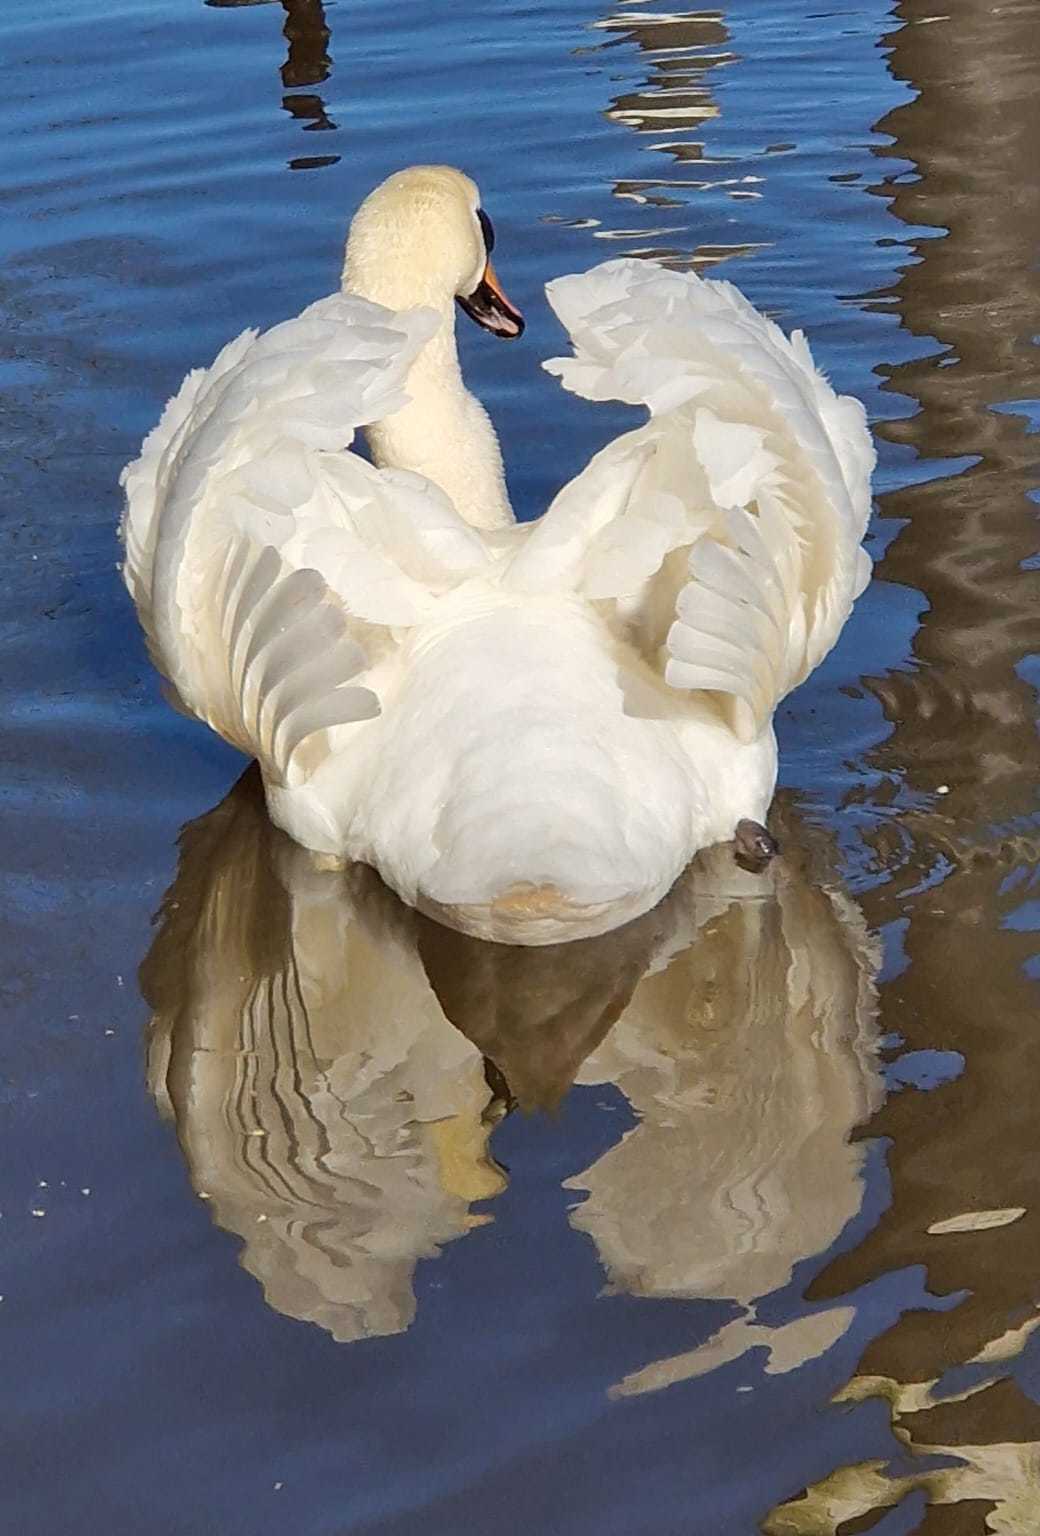 Swan on the river Weaver by Chalene Gibson